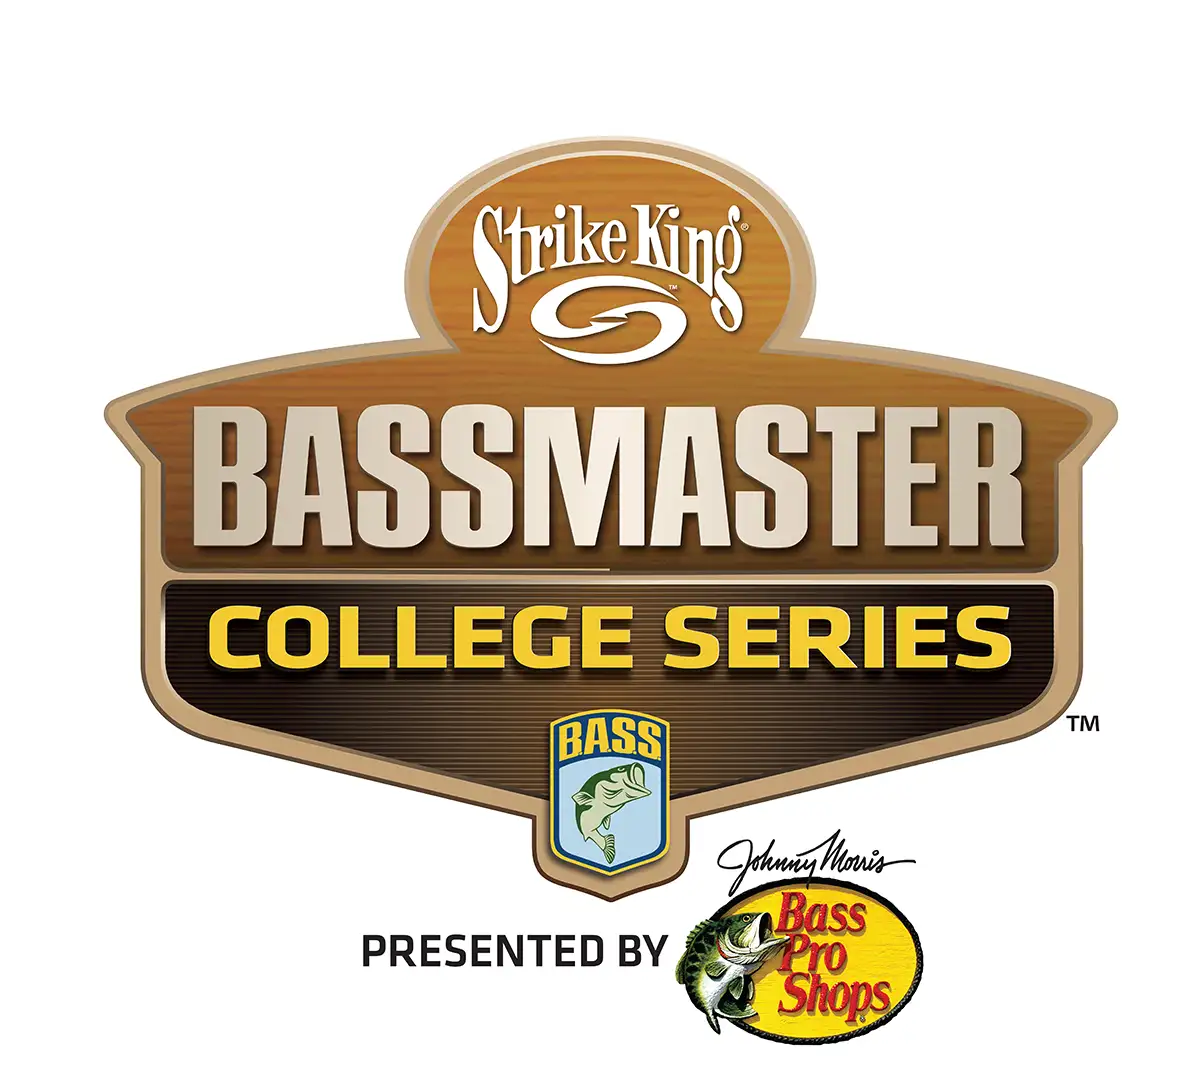 New Bassmaster College Series format creates opportunities for